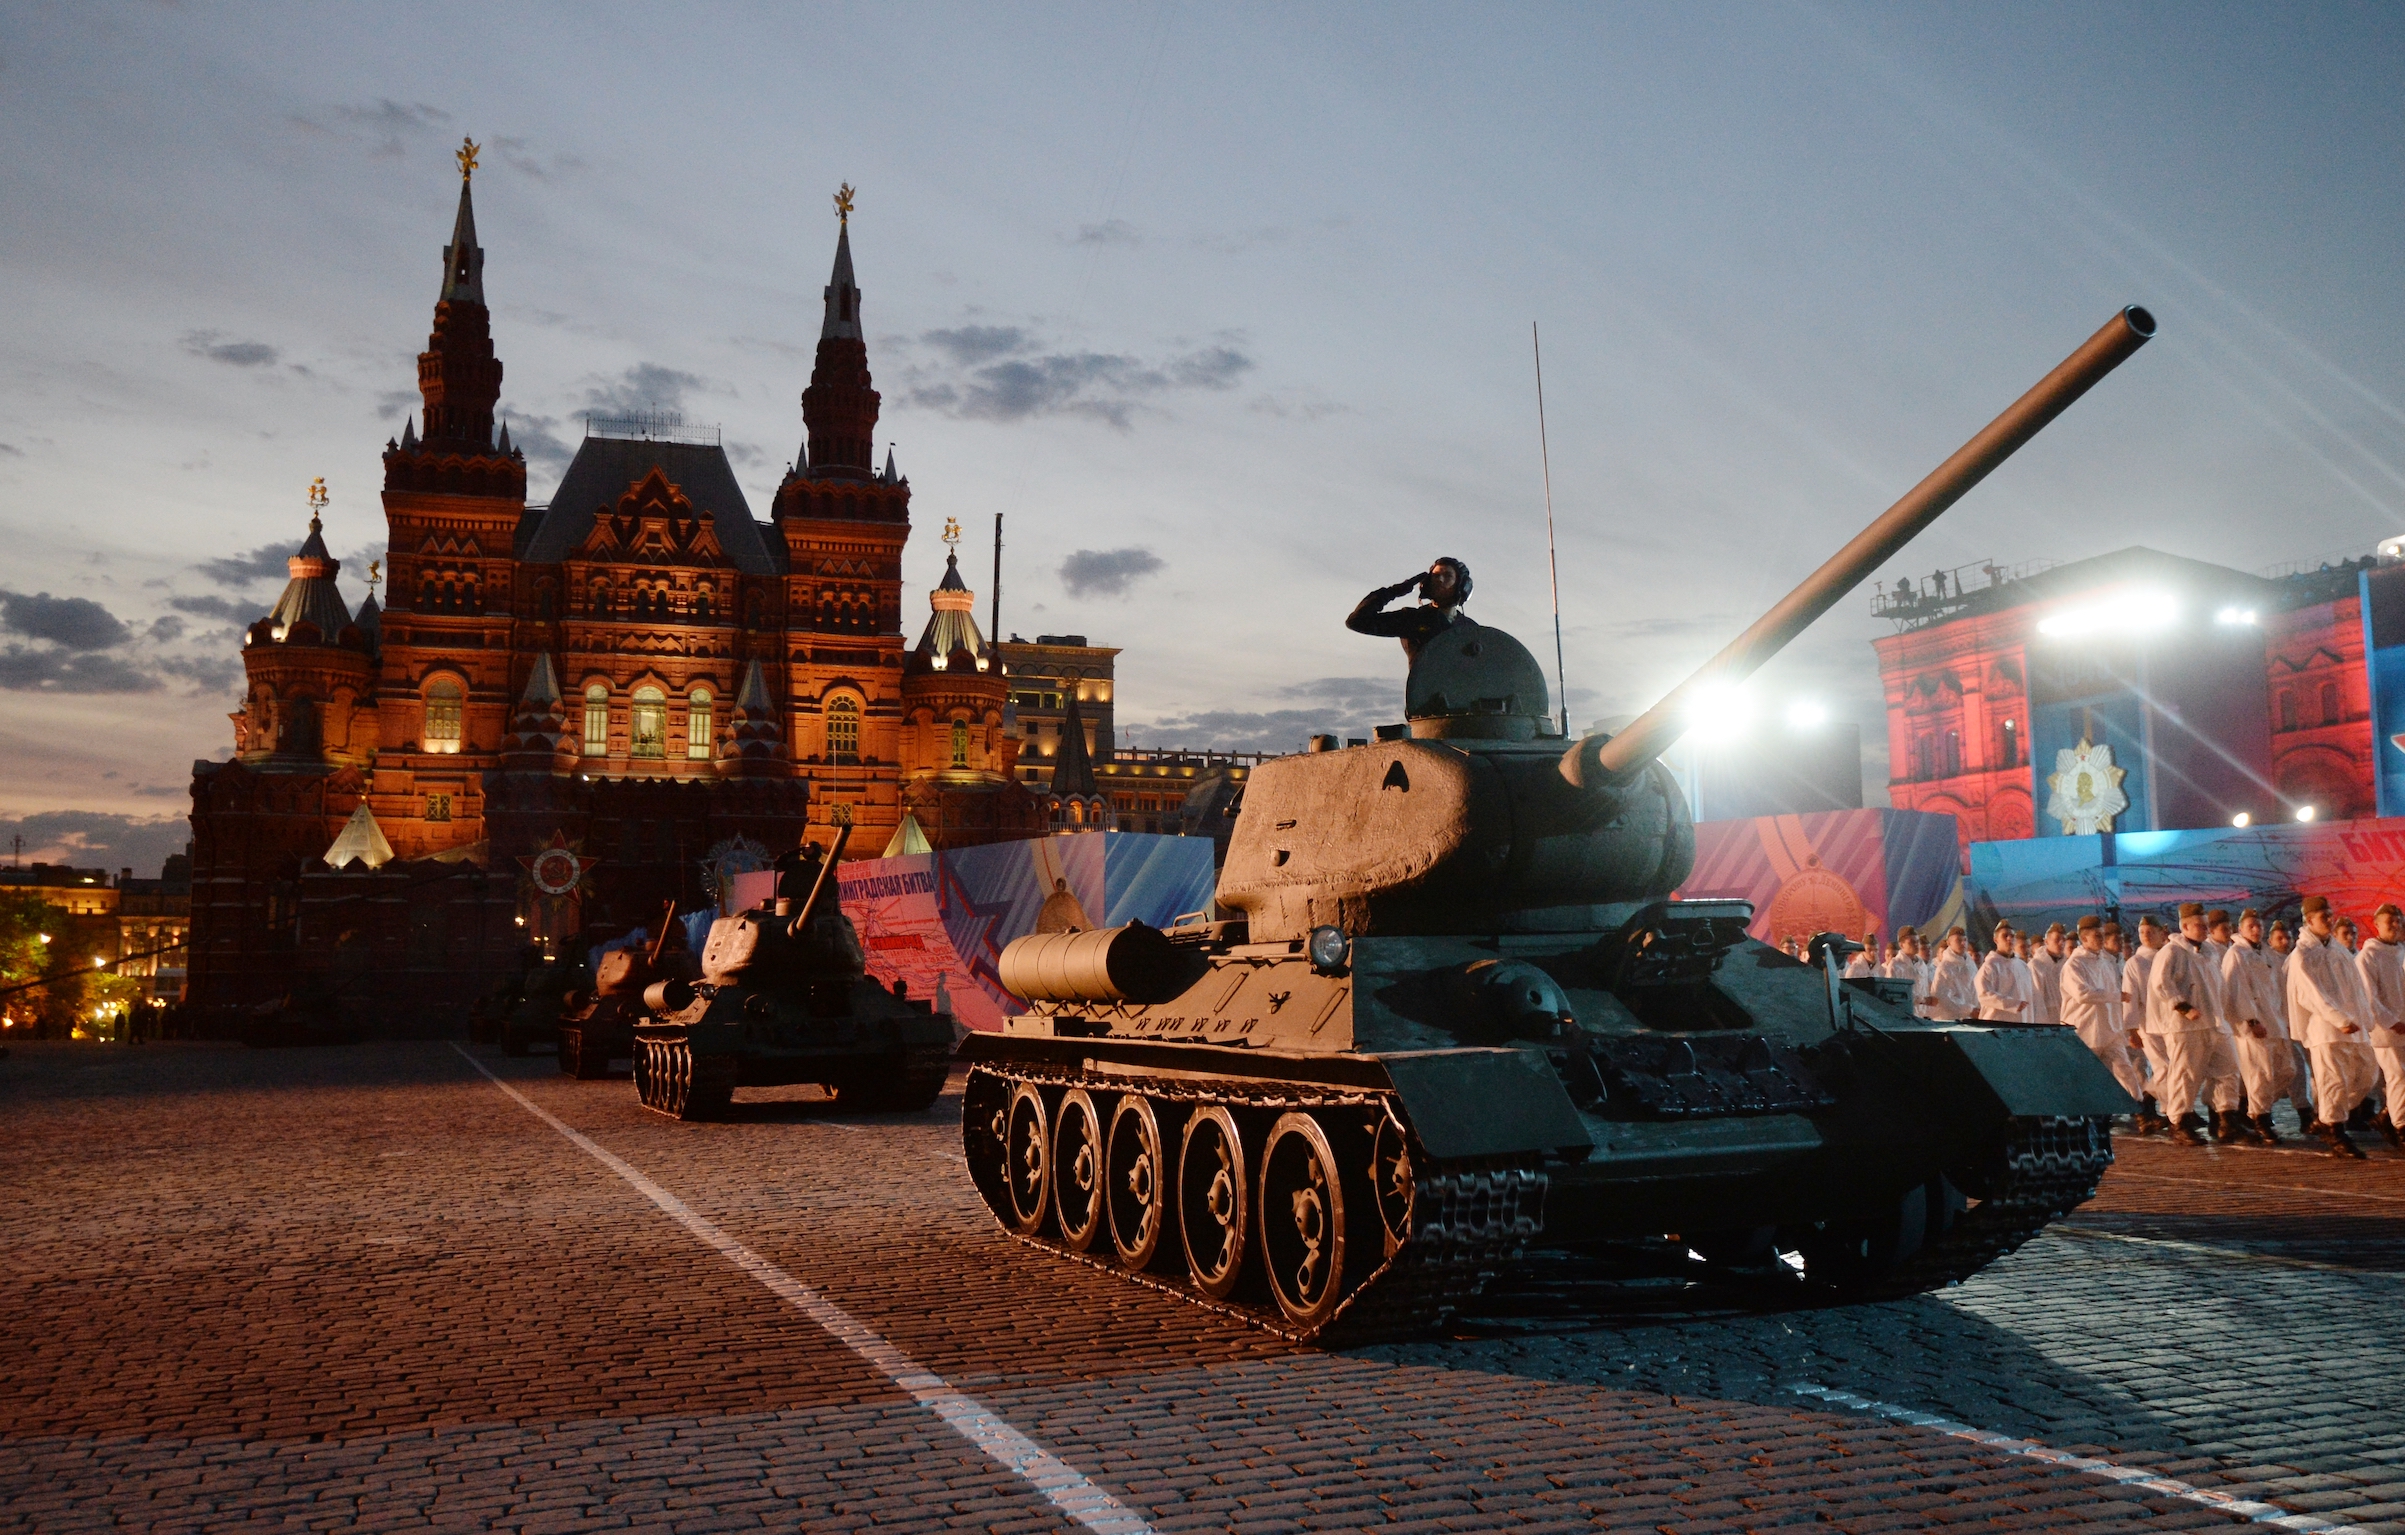 A gala concert was held in Red Square to mark the 70th anniversary victory, May 9, 2015 in Moscow. (Handout/Host photo agency / RIA Novosti / Getty Images)